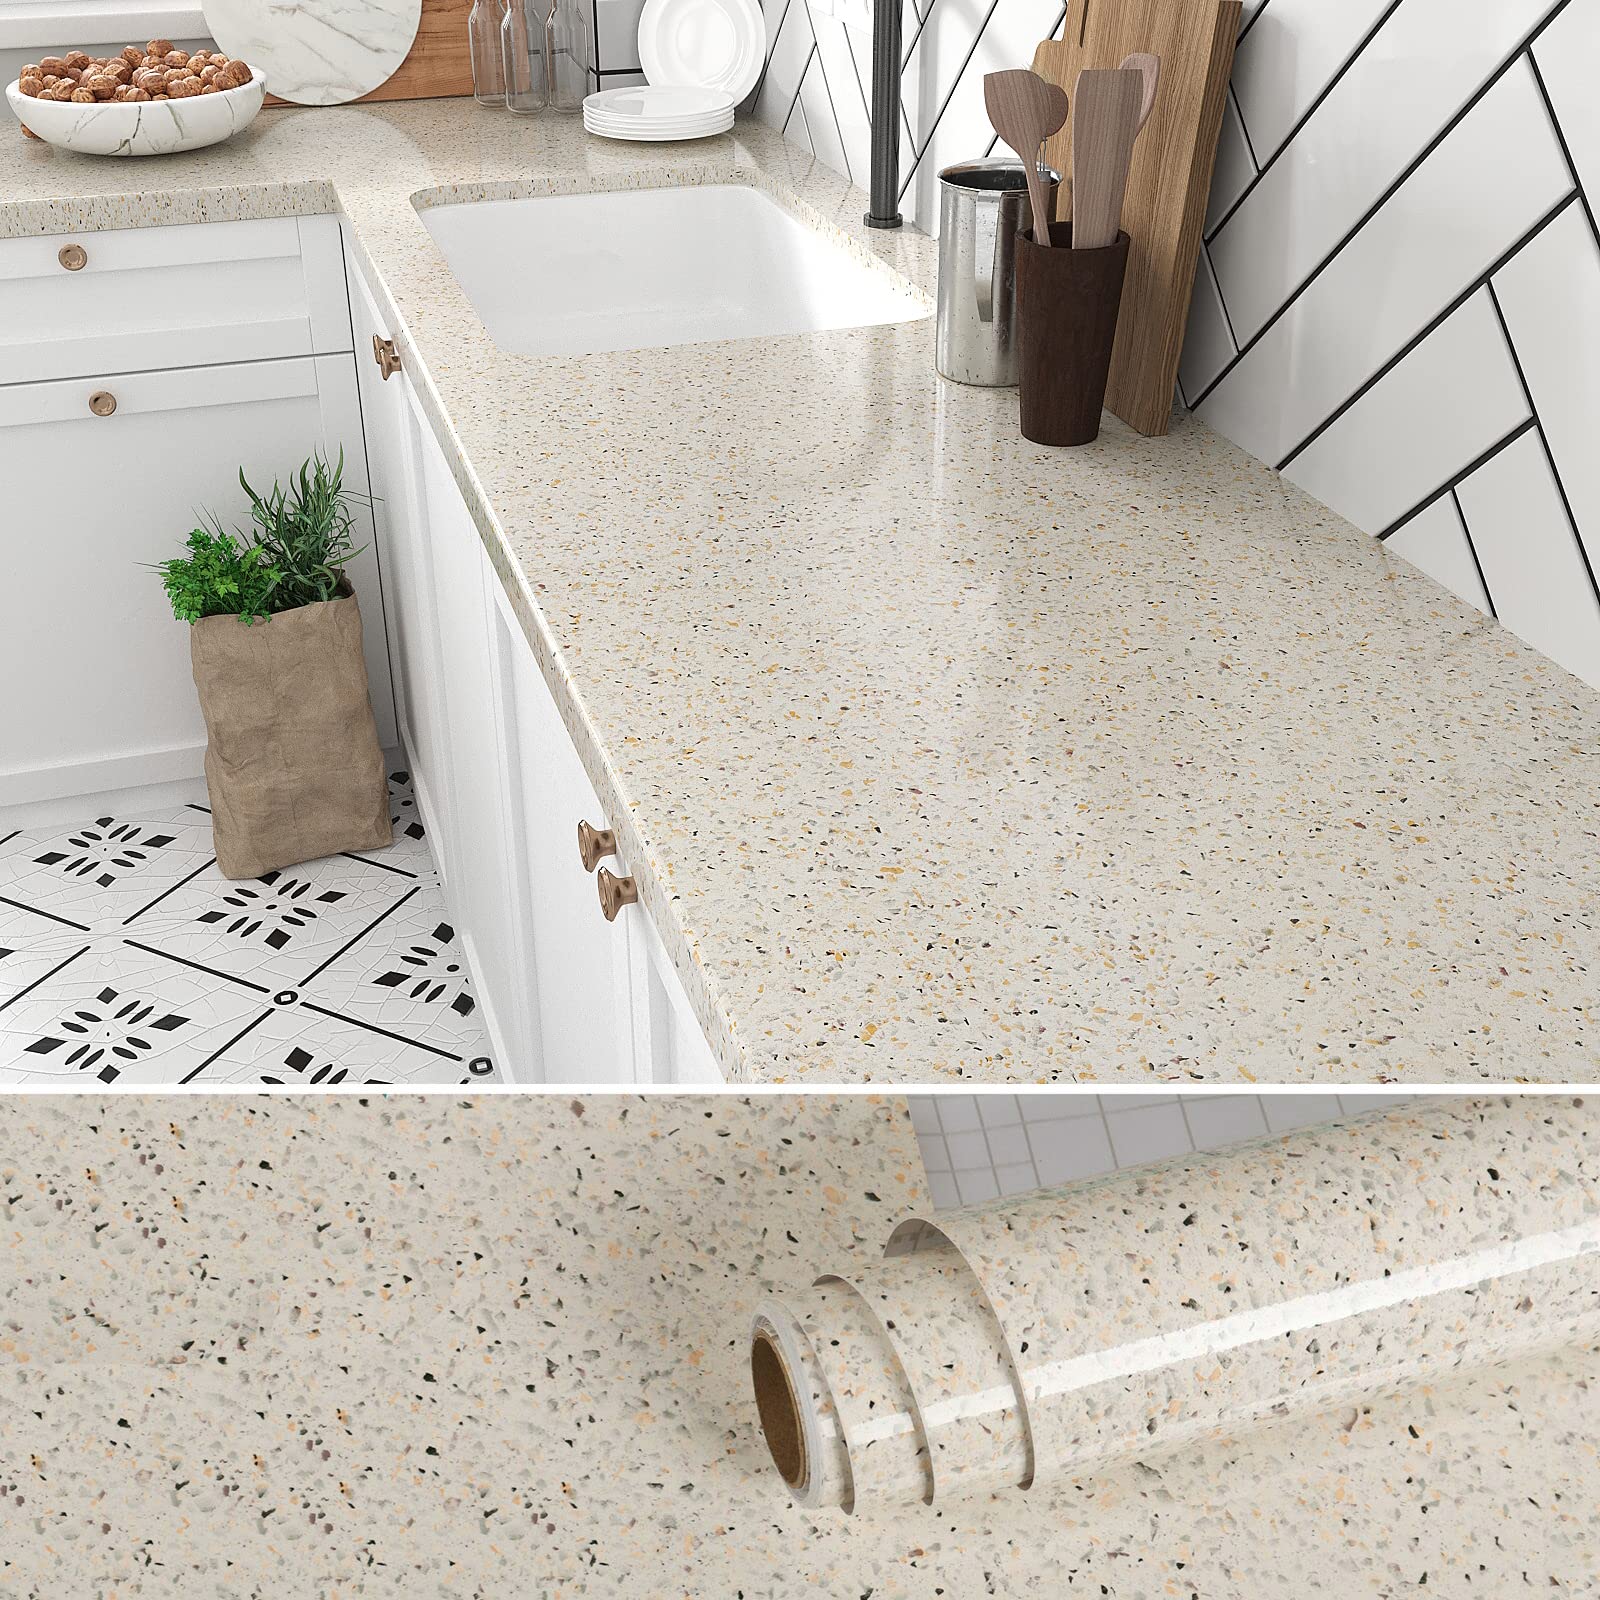 Beautify Your Countertops With Contact Paper